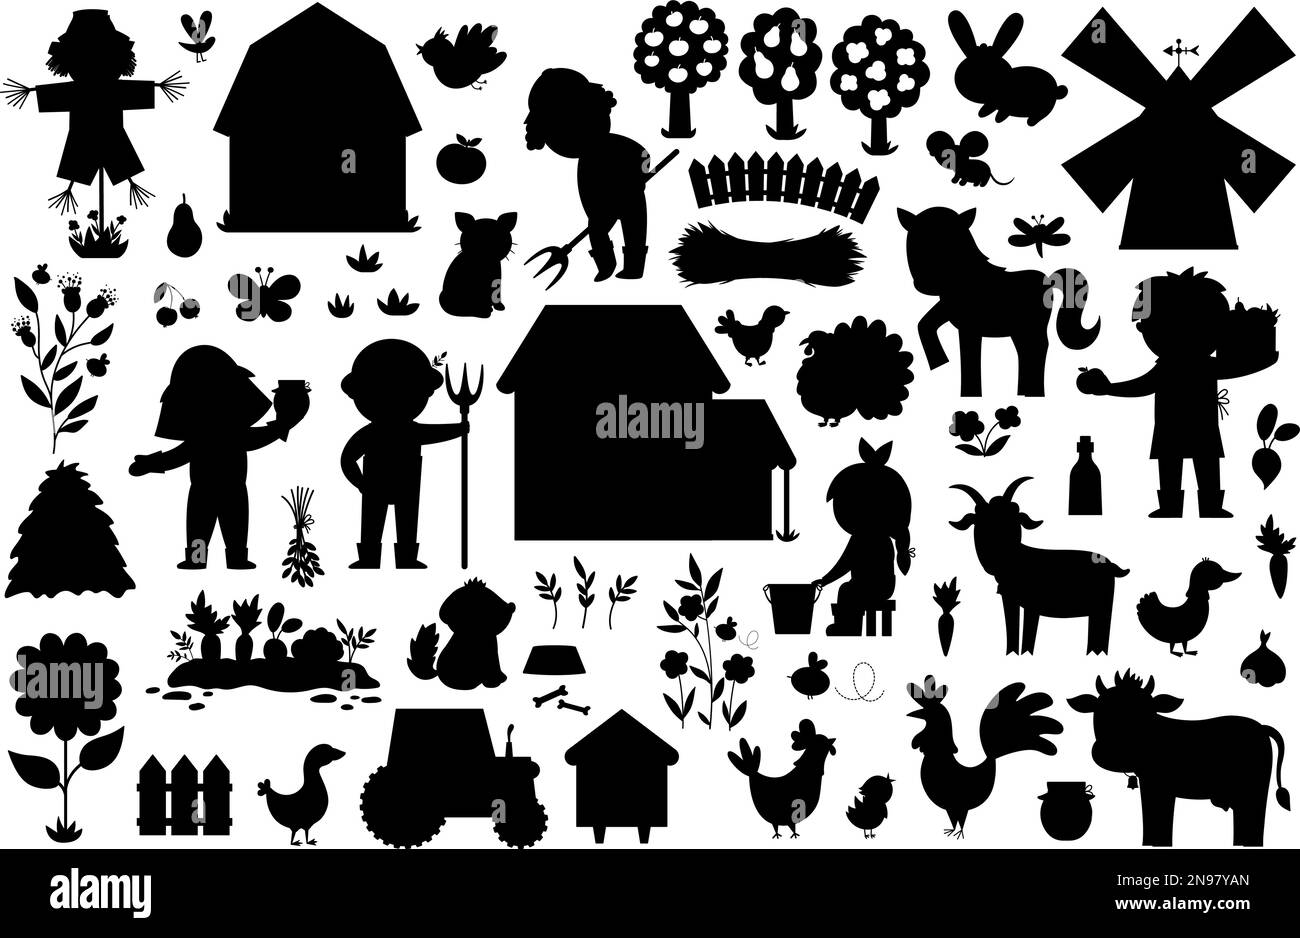 Vector farm silhouettes set. Rural black icons collection with funny kid farmers, barn, country house, animals, birds, tractor, windmill, hay, beehive Stock Vector